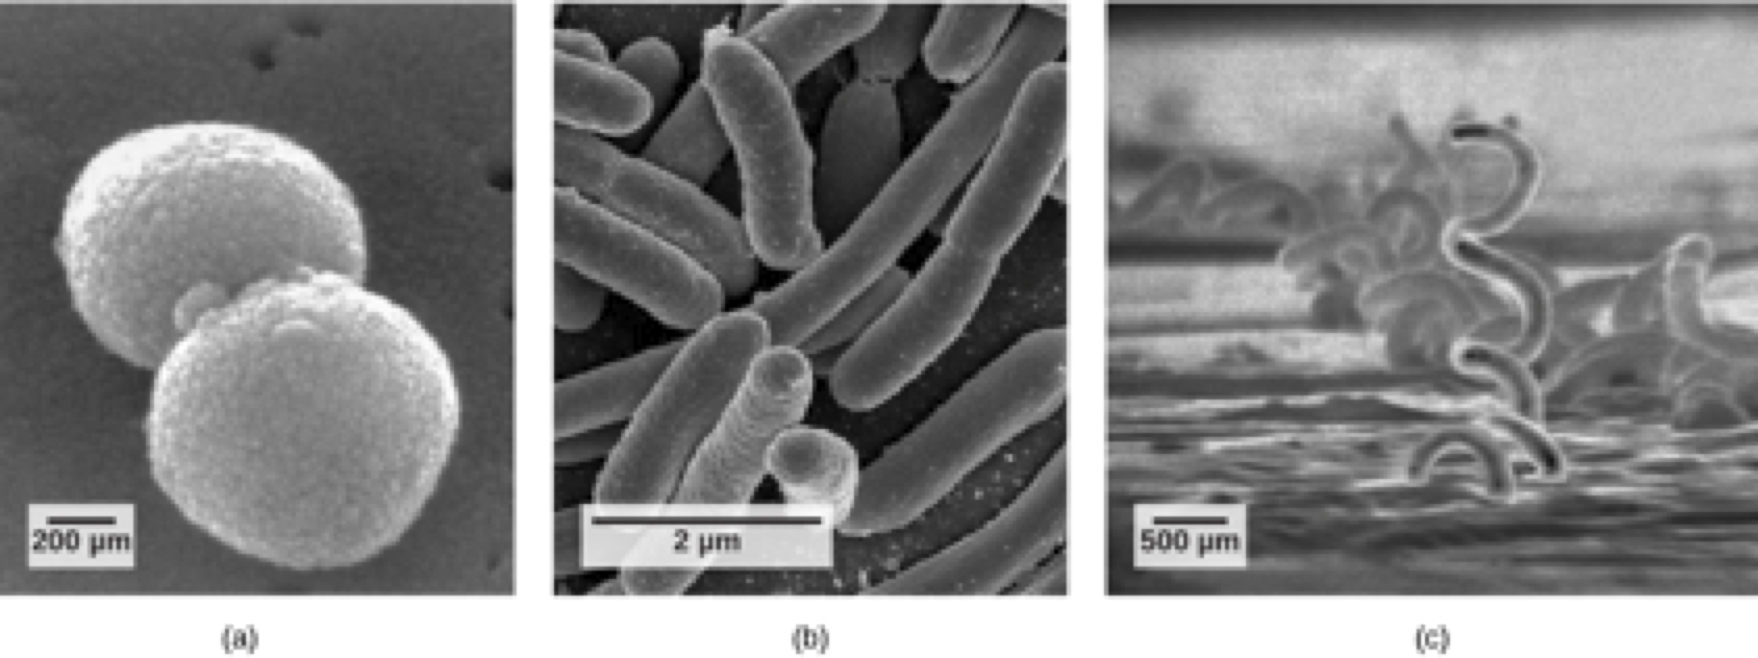 Three scanning electron micrographs. The first shows two round bacterial cells. The second shows several rod shaped bacterial cells. The third shows several spiral shaped